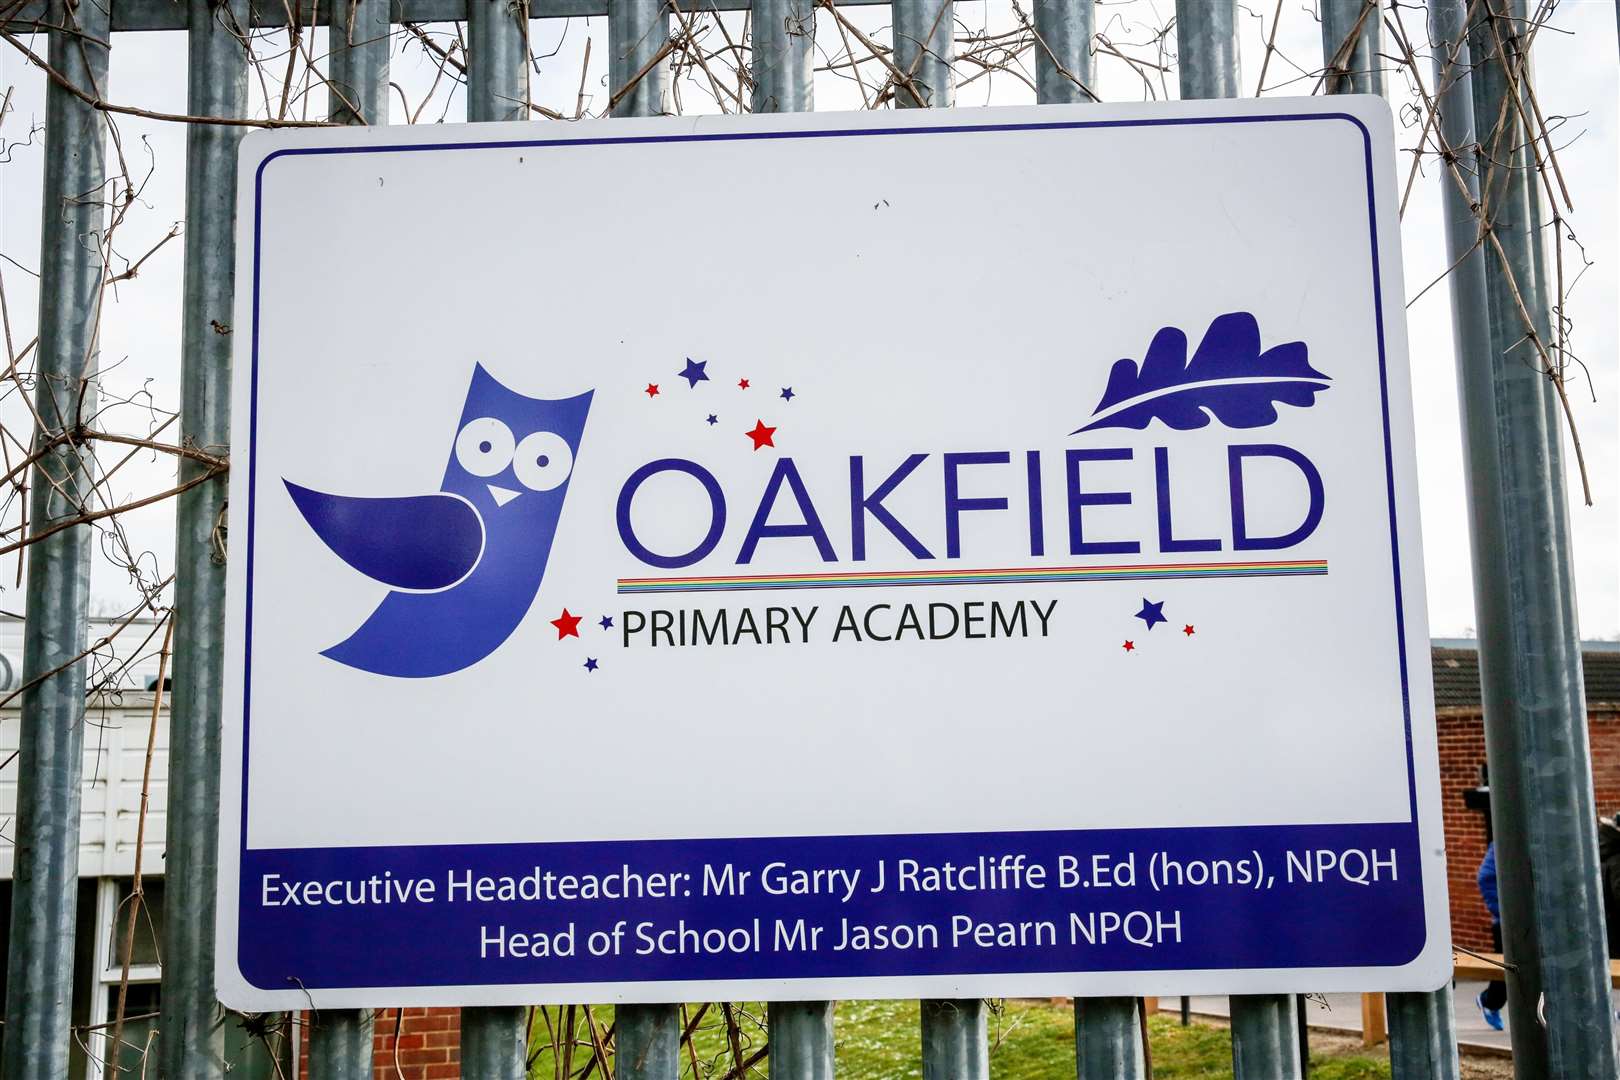 The incident happened outside Oakfield Primary Academy, Oakfield Lane, Dartford